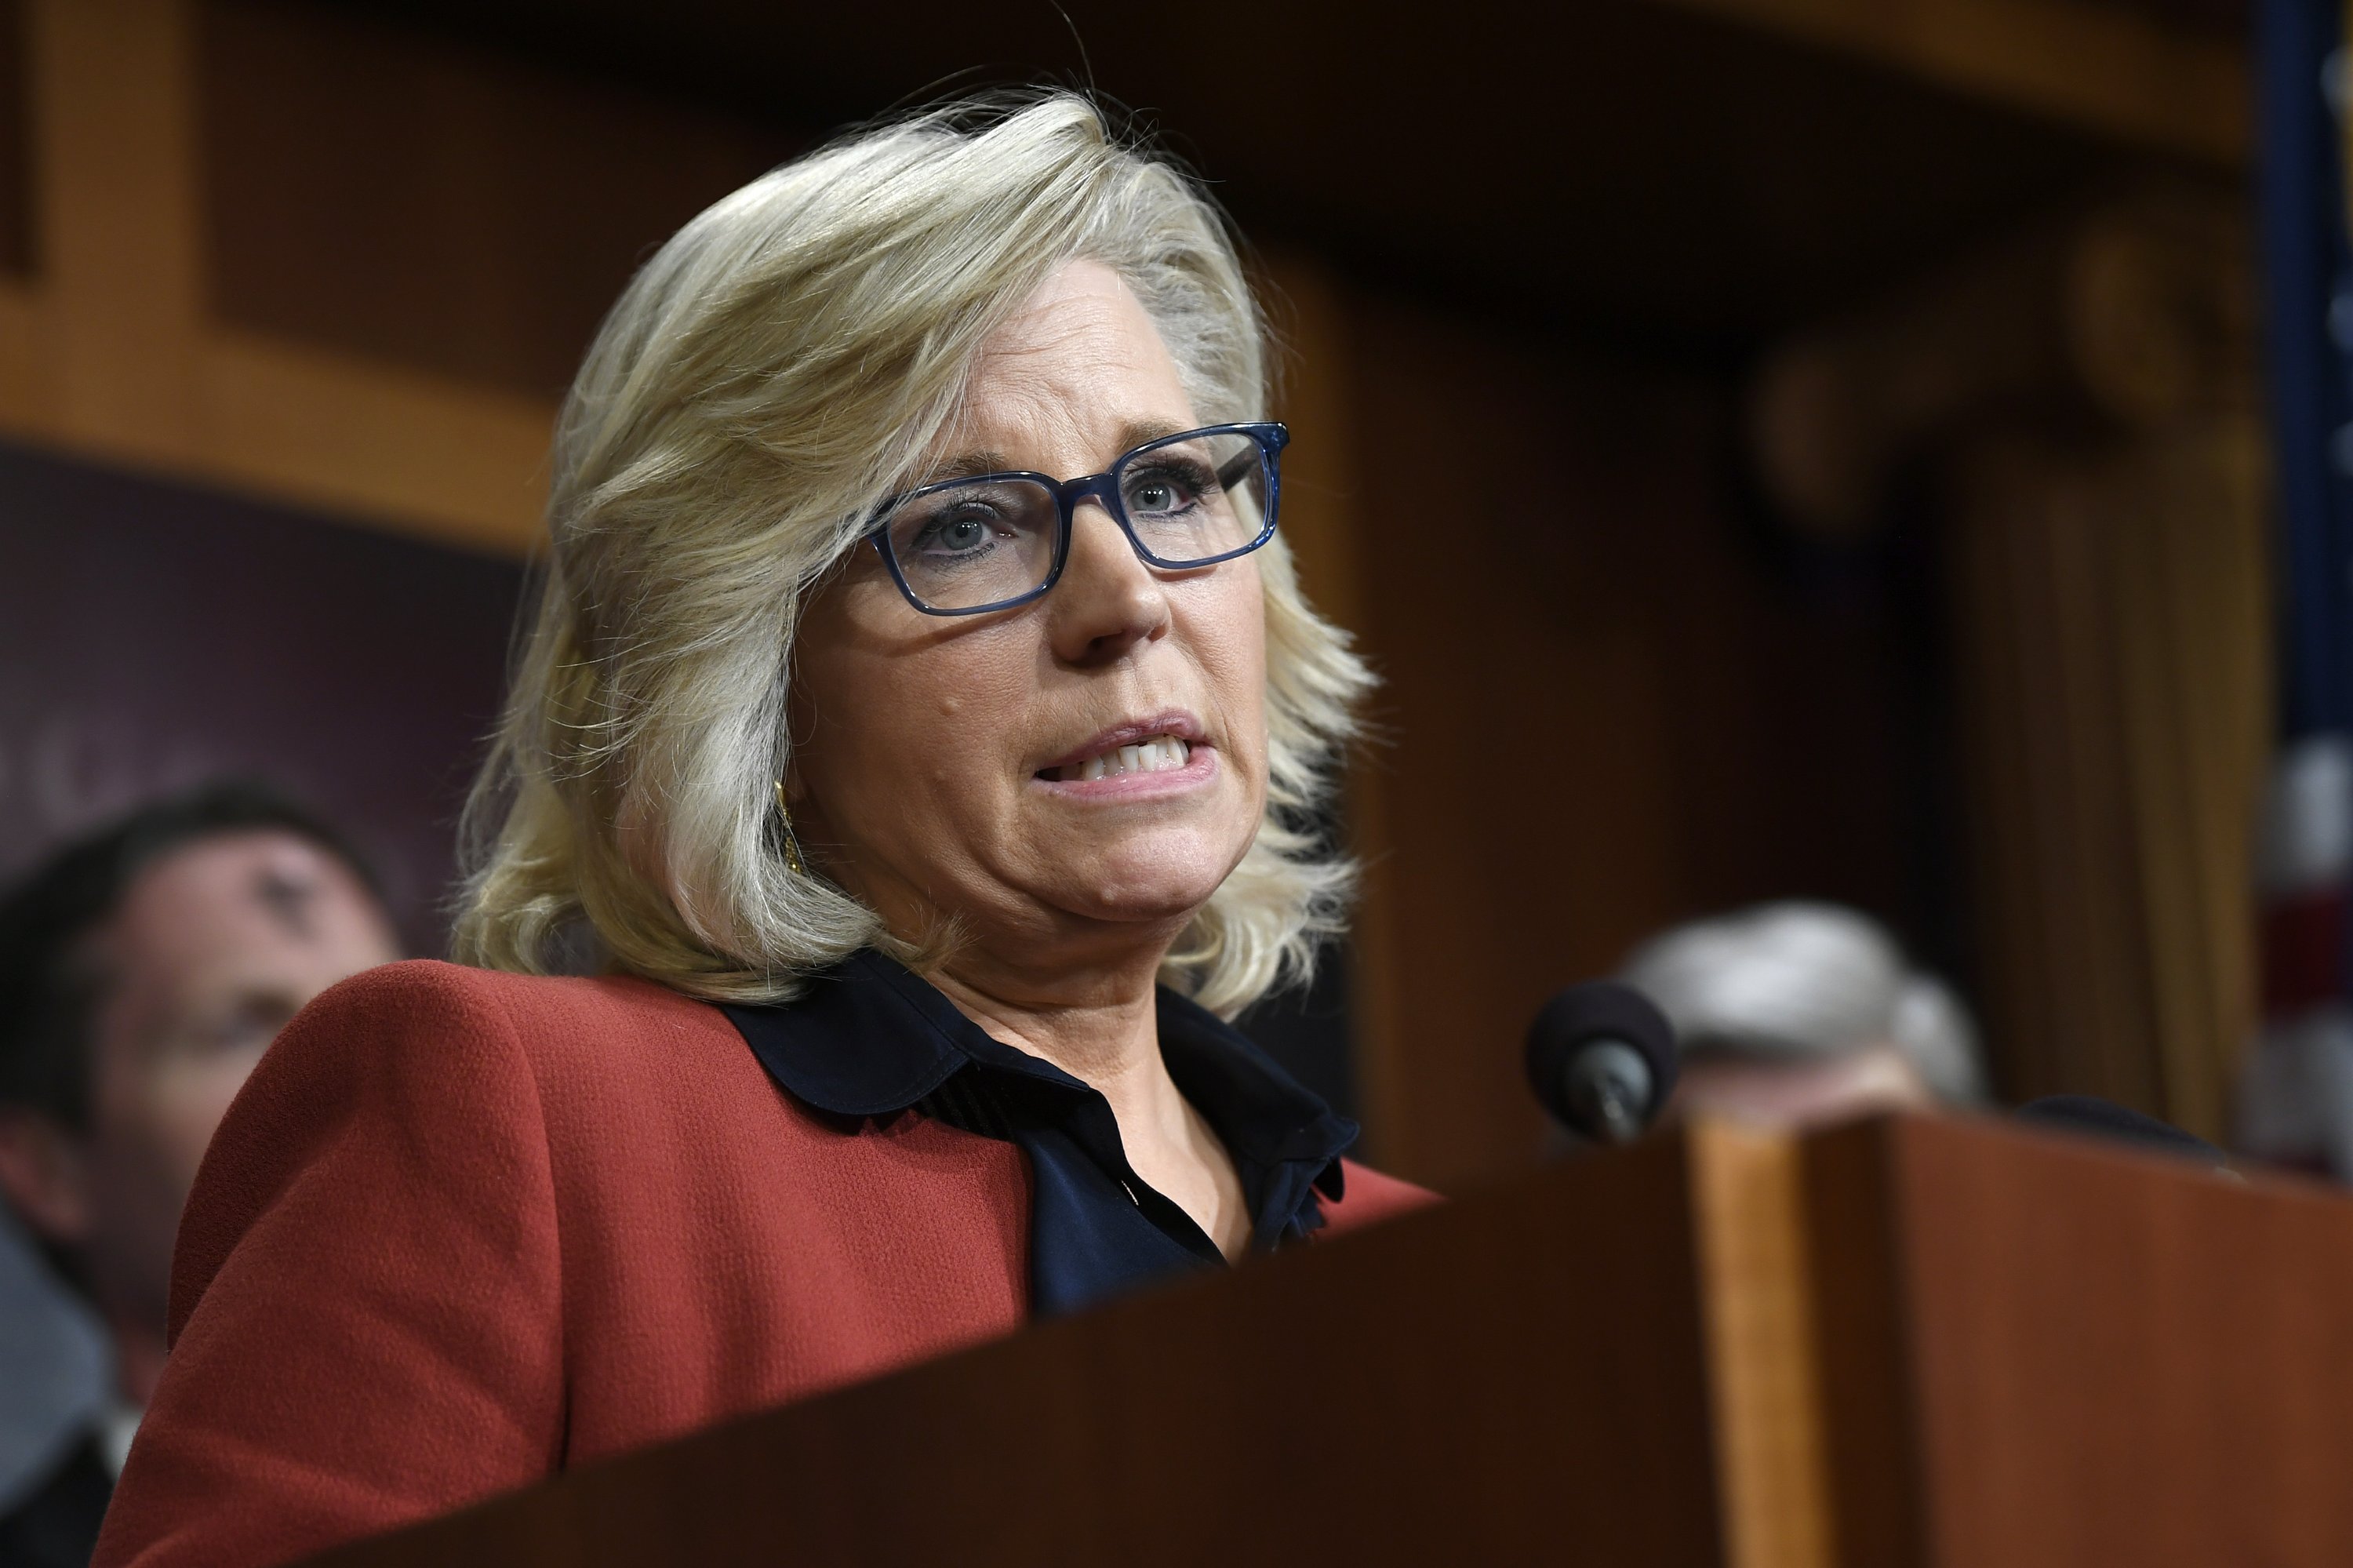 The Wyoming Republican Party rebukes Rep. Liz Cheney over the impeachment vote